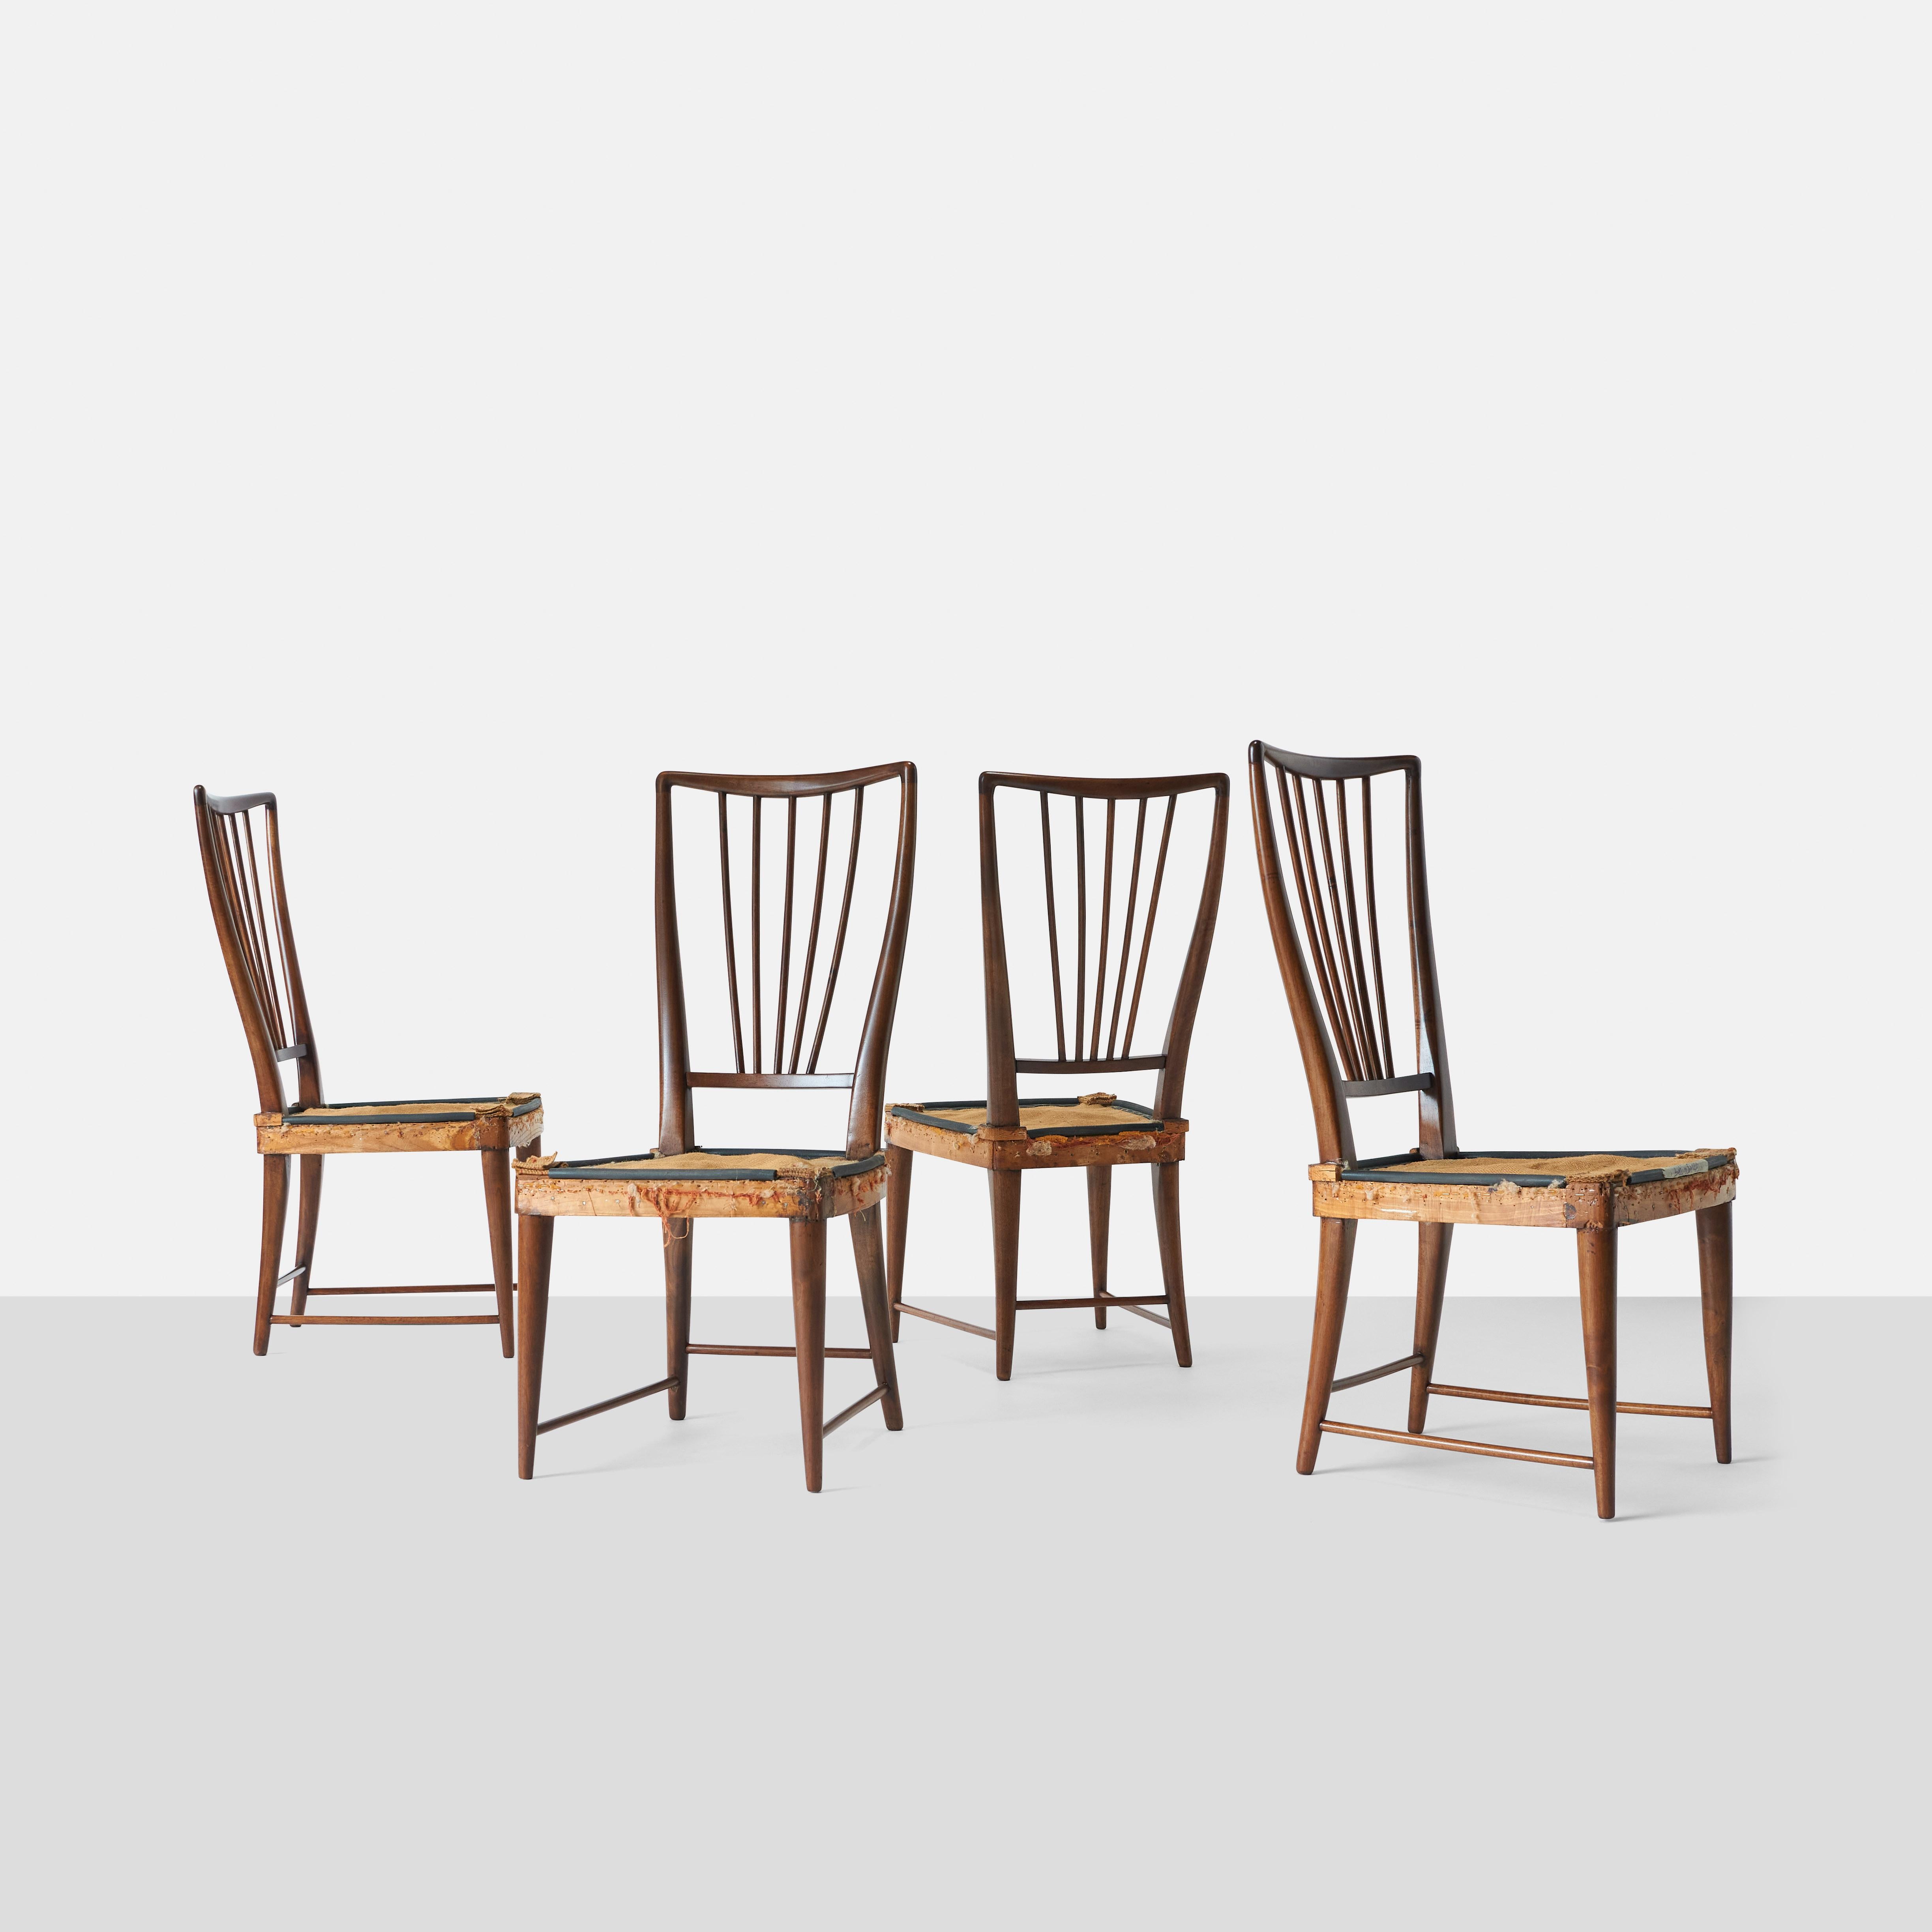 Set of four Paolo Buffa walnut dining chairs. The frames are fully restored. Price includes upholstery of seats in COM.
      